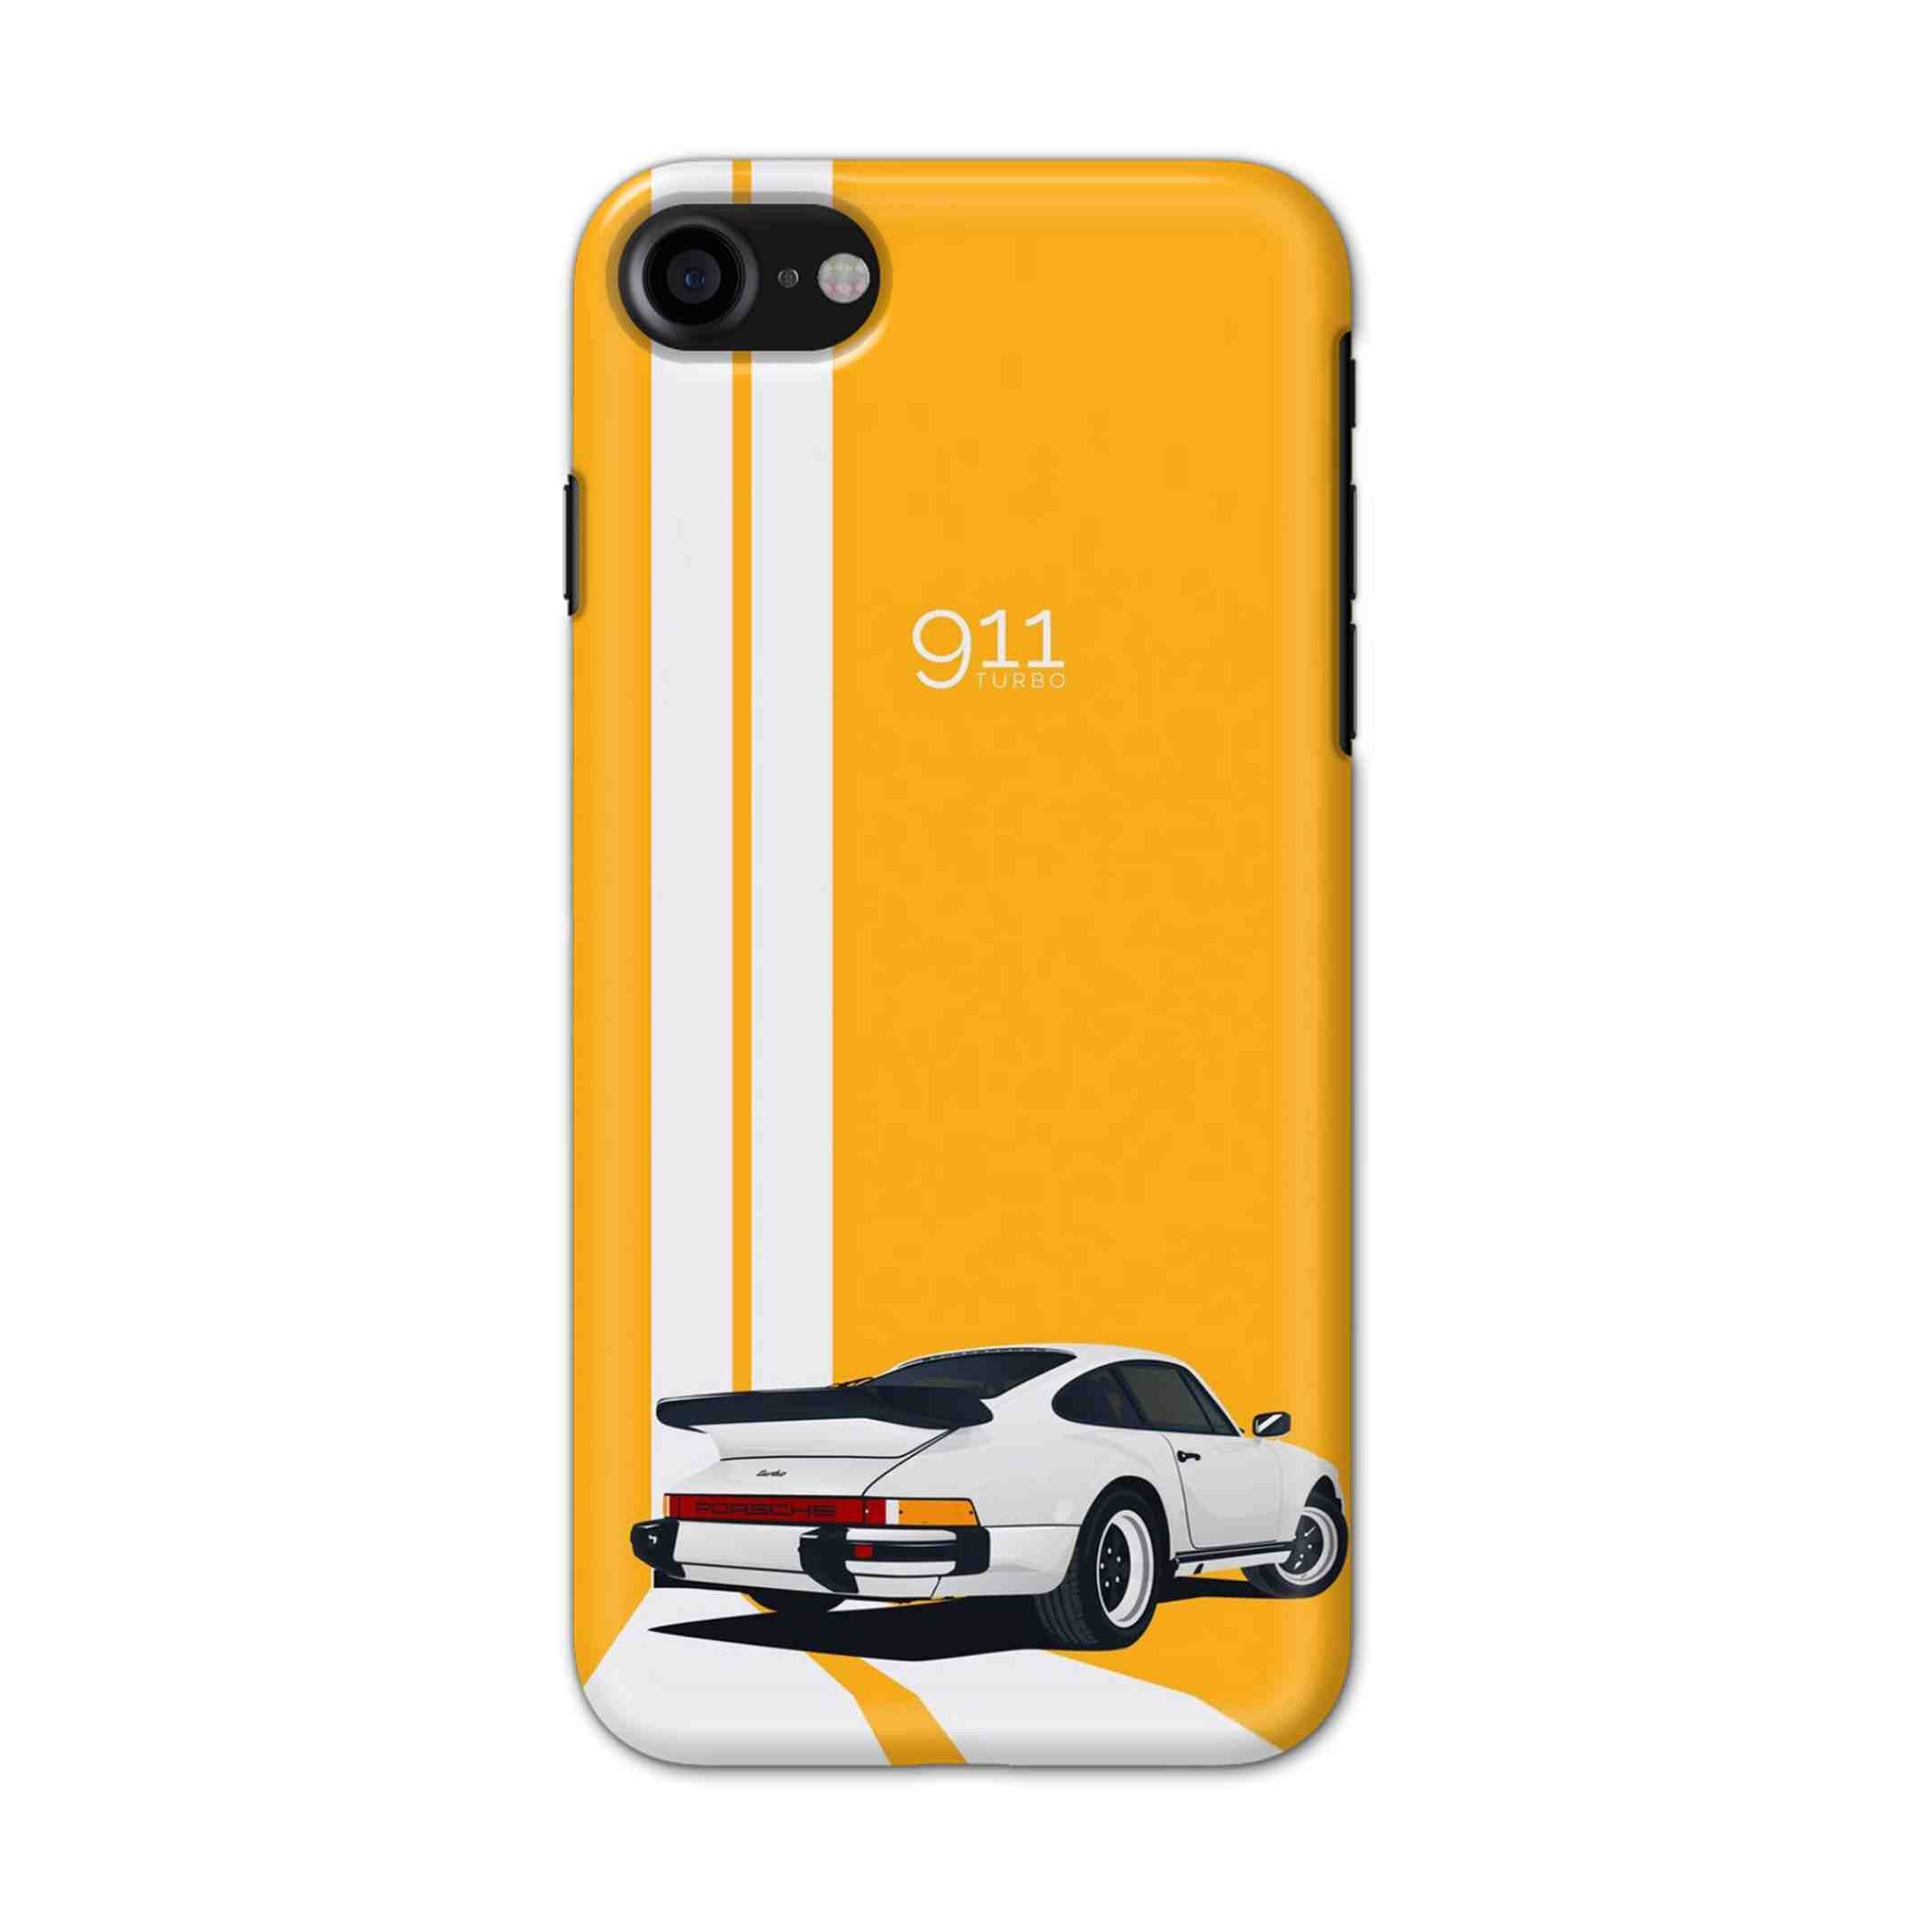 Buy 911 Gt Porche Hard Back Mobile Phone Case/Cover For iPhone 7 / 8 Online